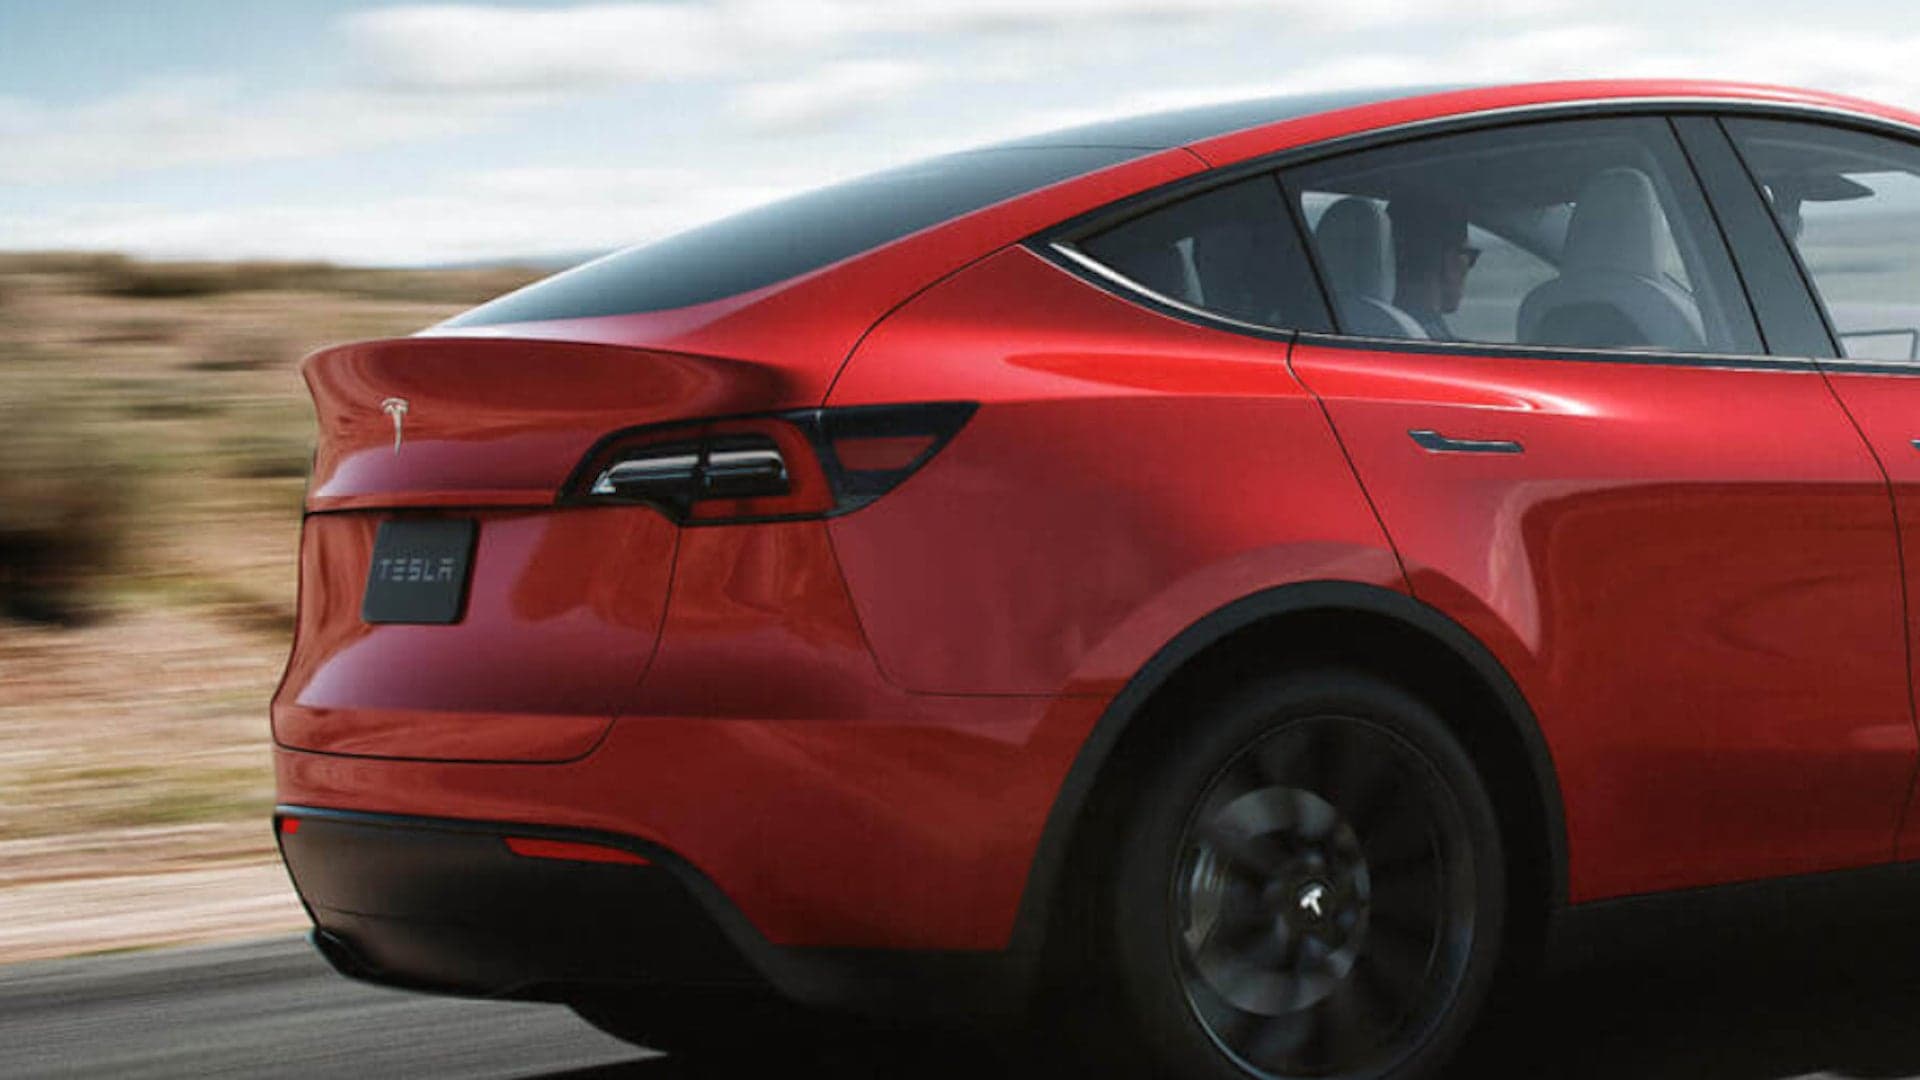 The Tesla Model Y’s Rear End Design Might Make It Extremely Expensive to Repair